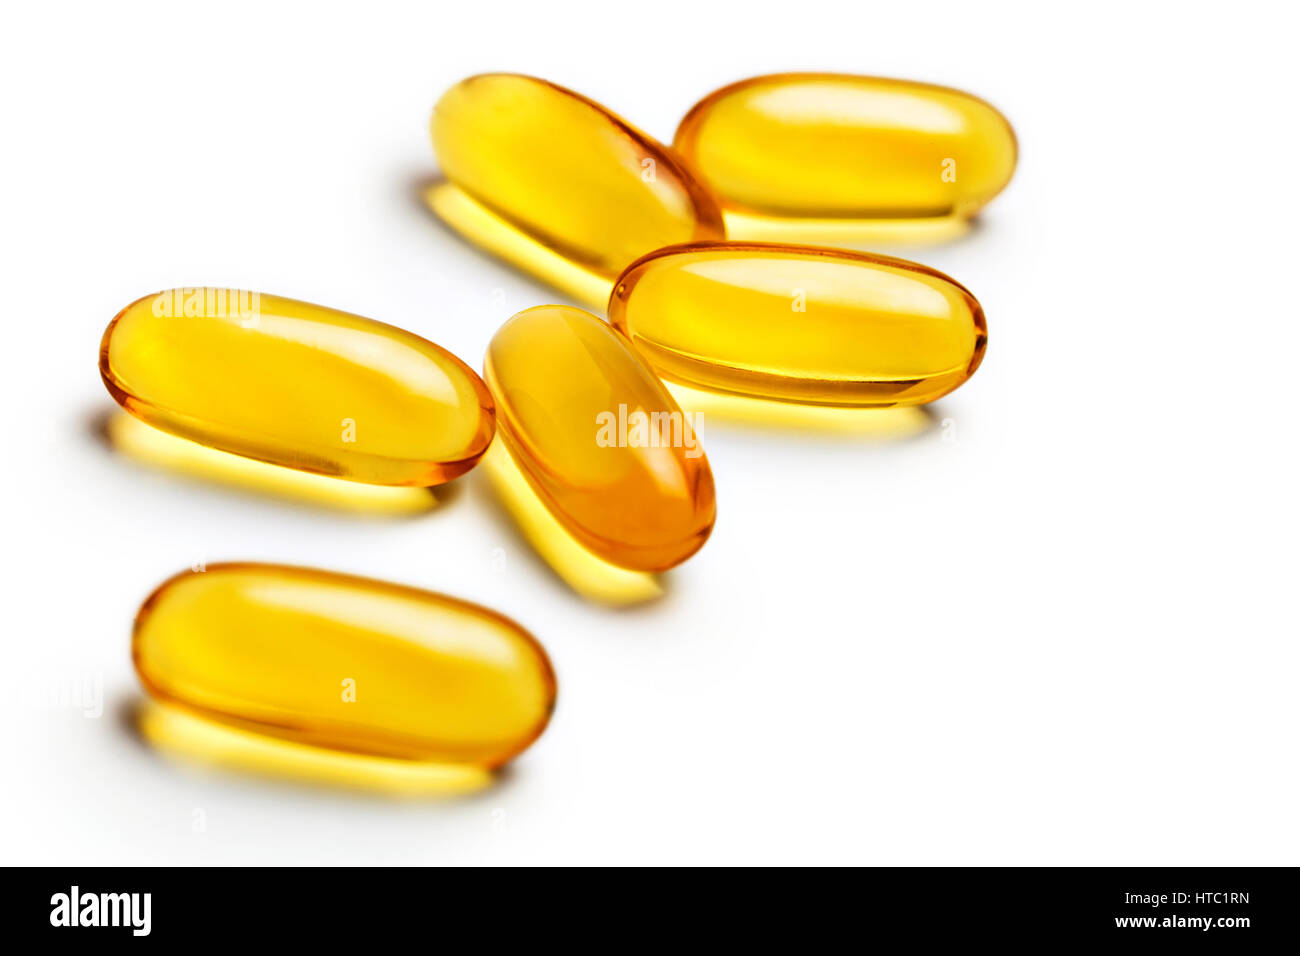 Capsules Omega 3 isolated on white background. Close up, top view, high resolution product. Health care concept. Stock Photo